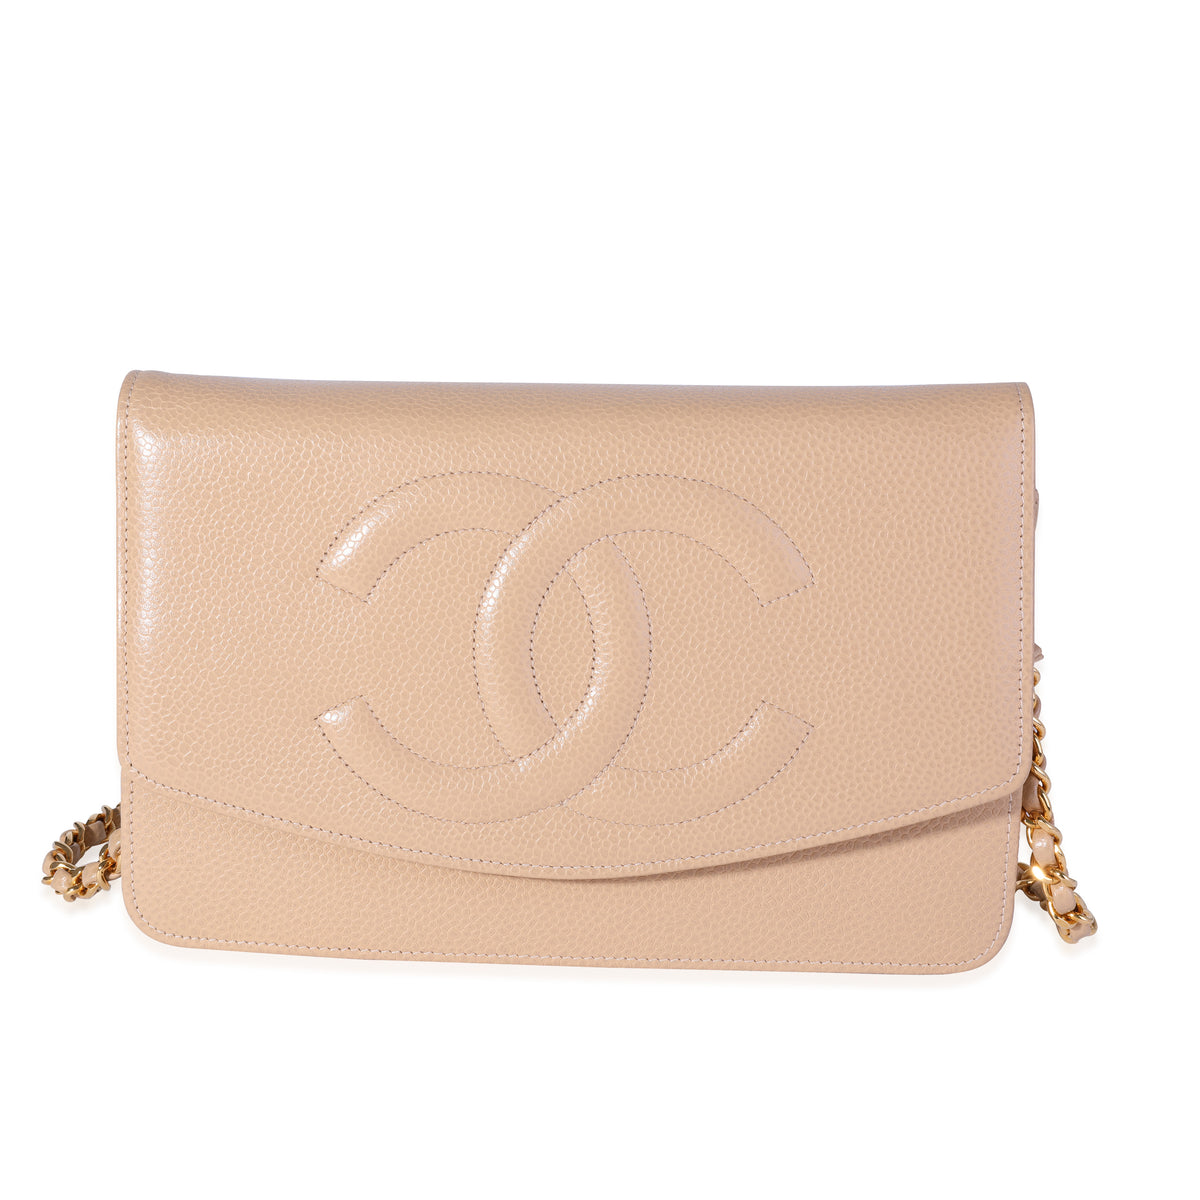 Chanel - Authenticated Wallet on Chain Timeless/Classique Handbag - Leather Beige for Women, Never Worn, with Tag